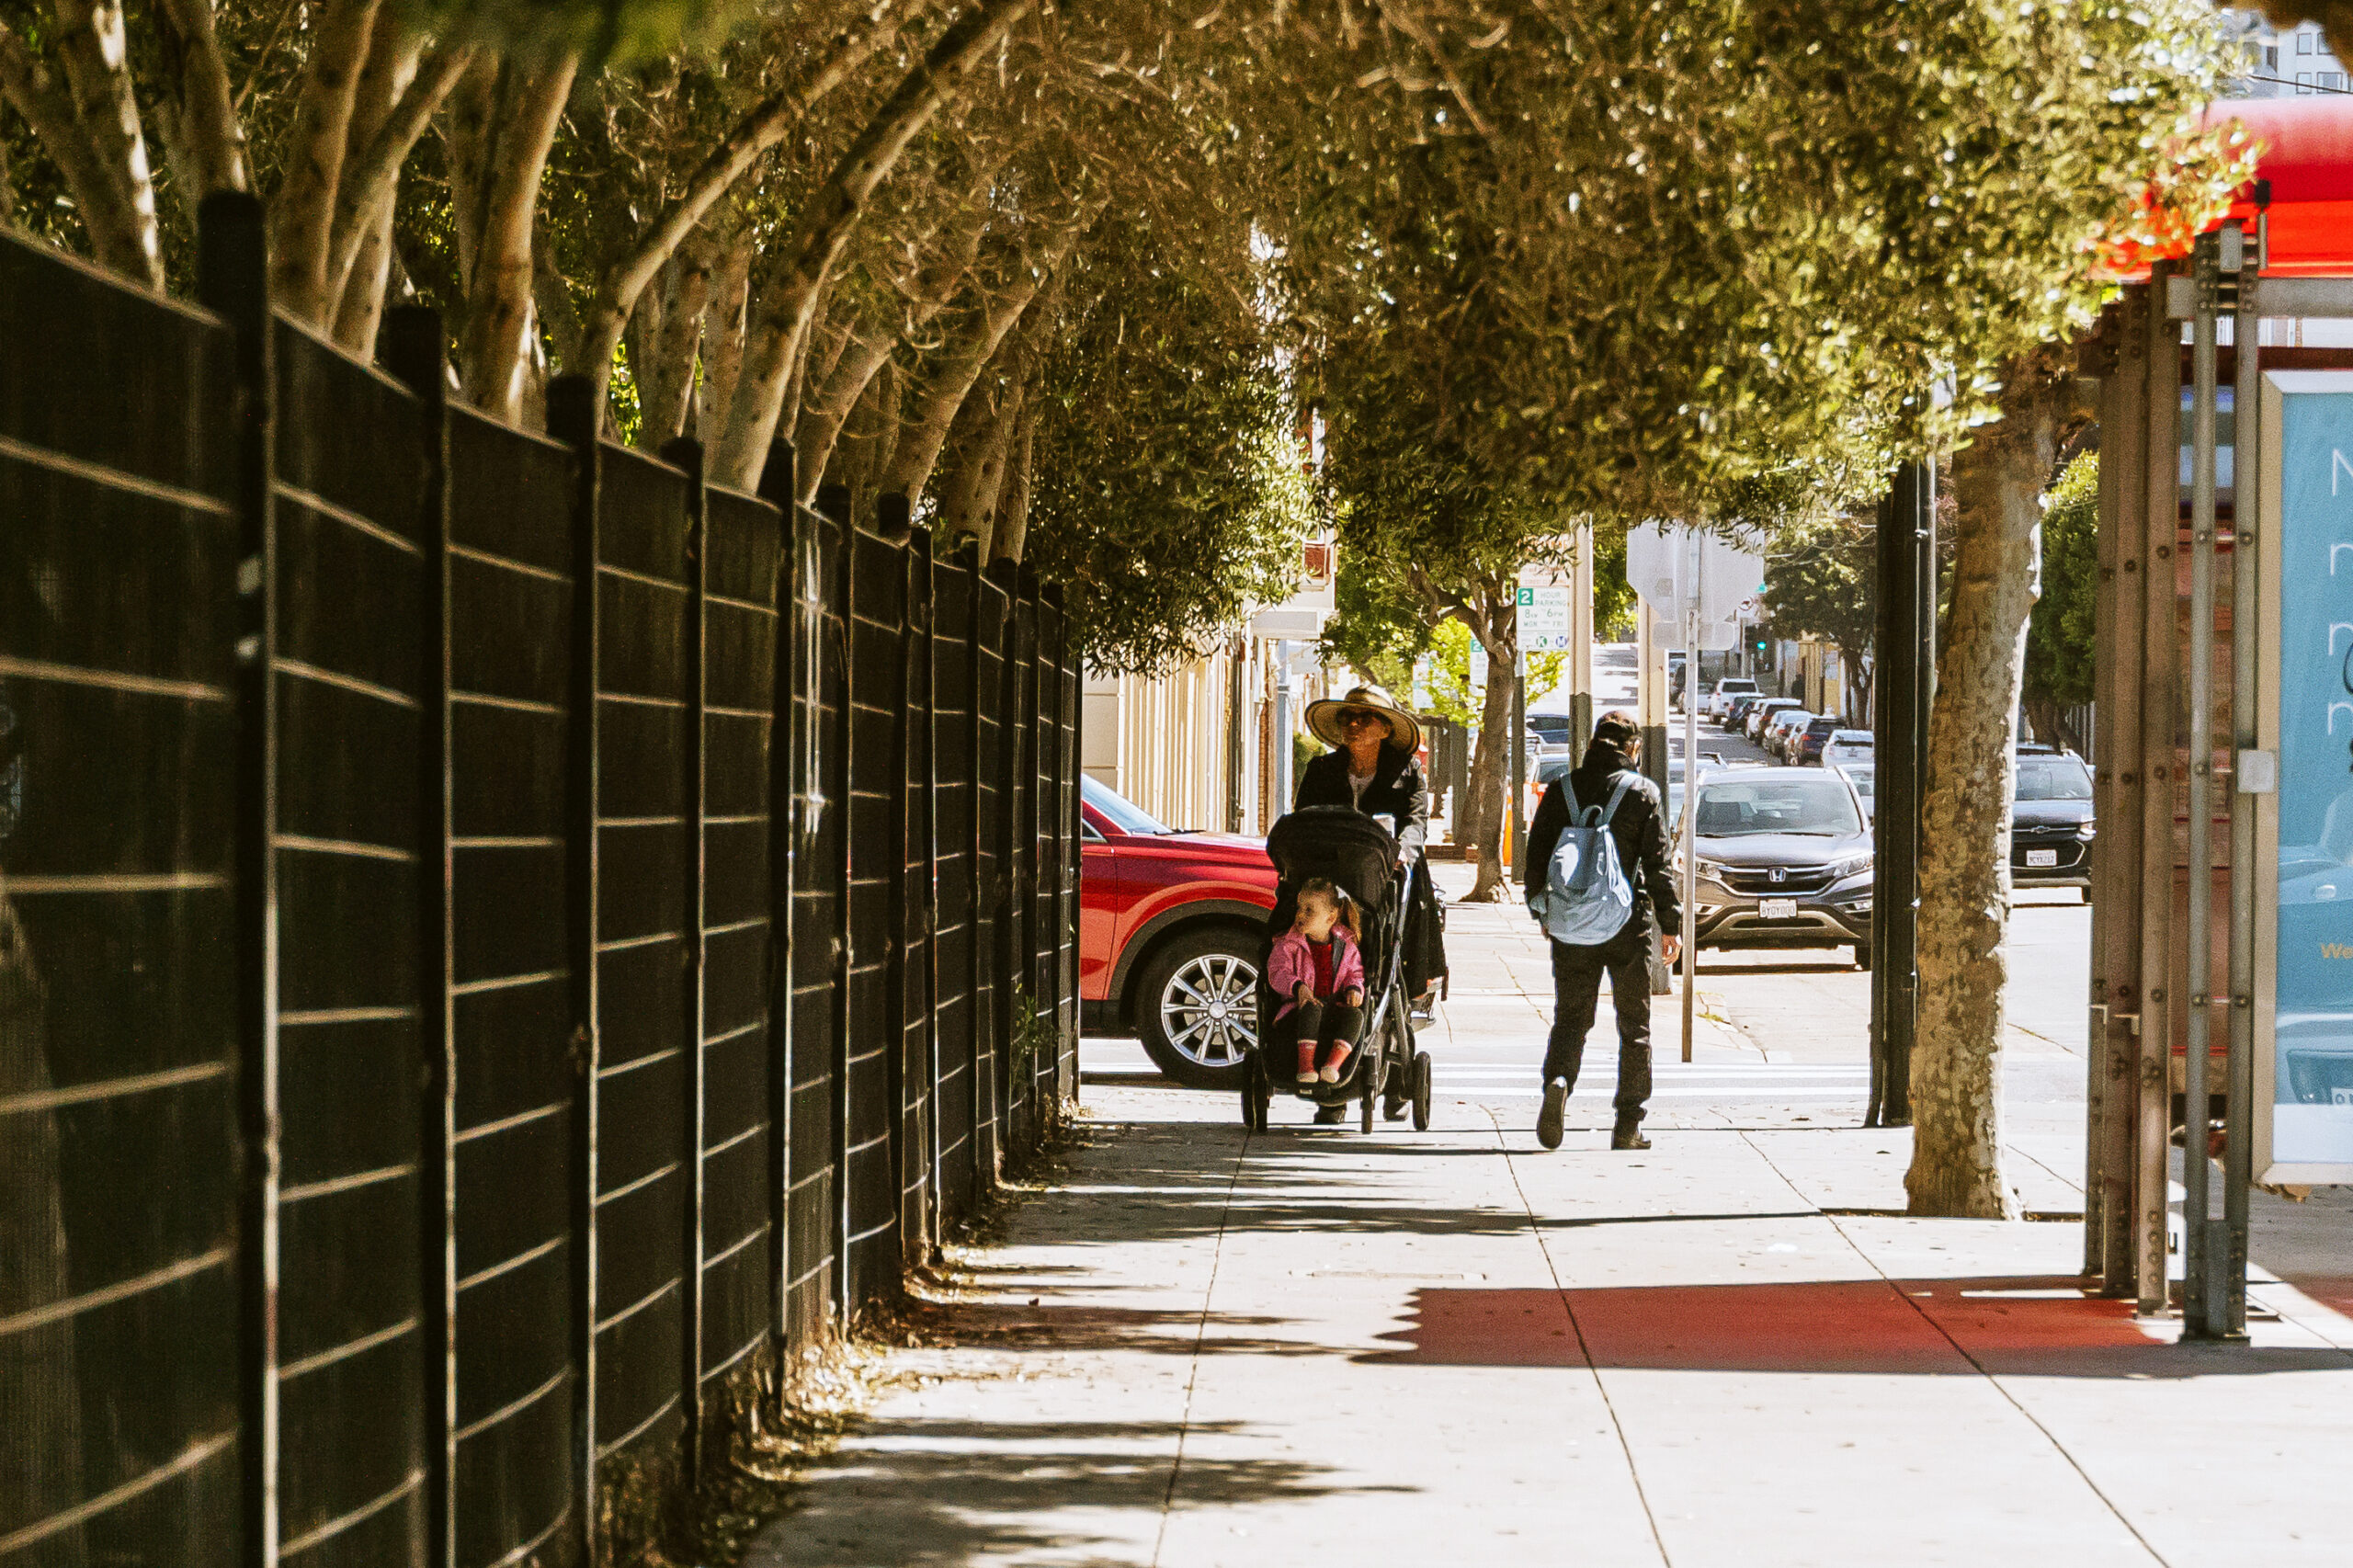 Tree-lined street with a person pushing a stroller and another walking by a black fence.